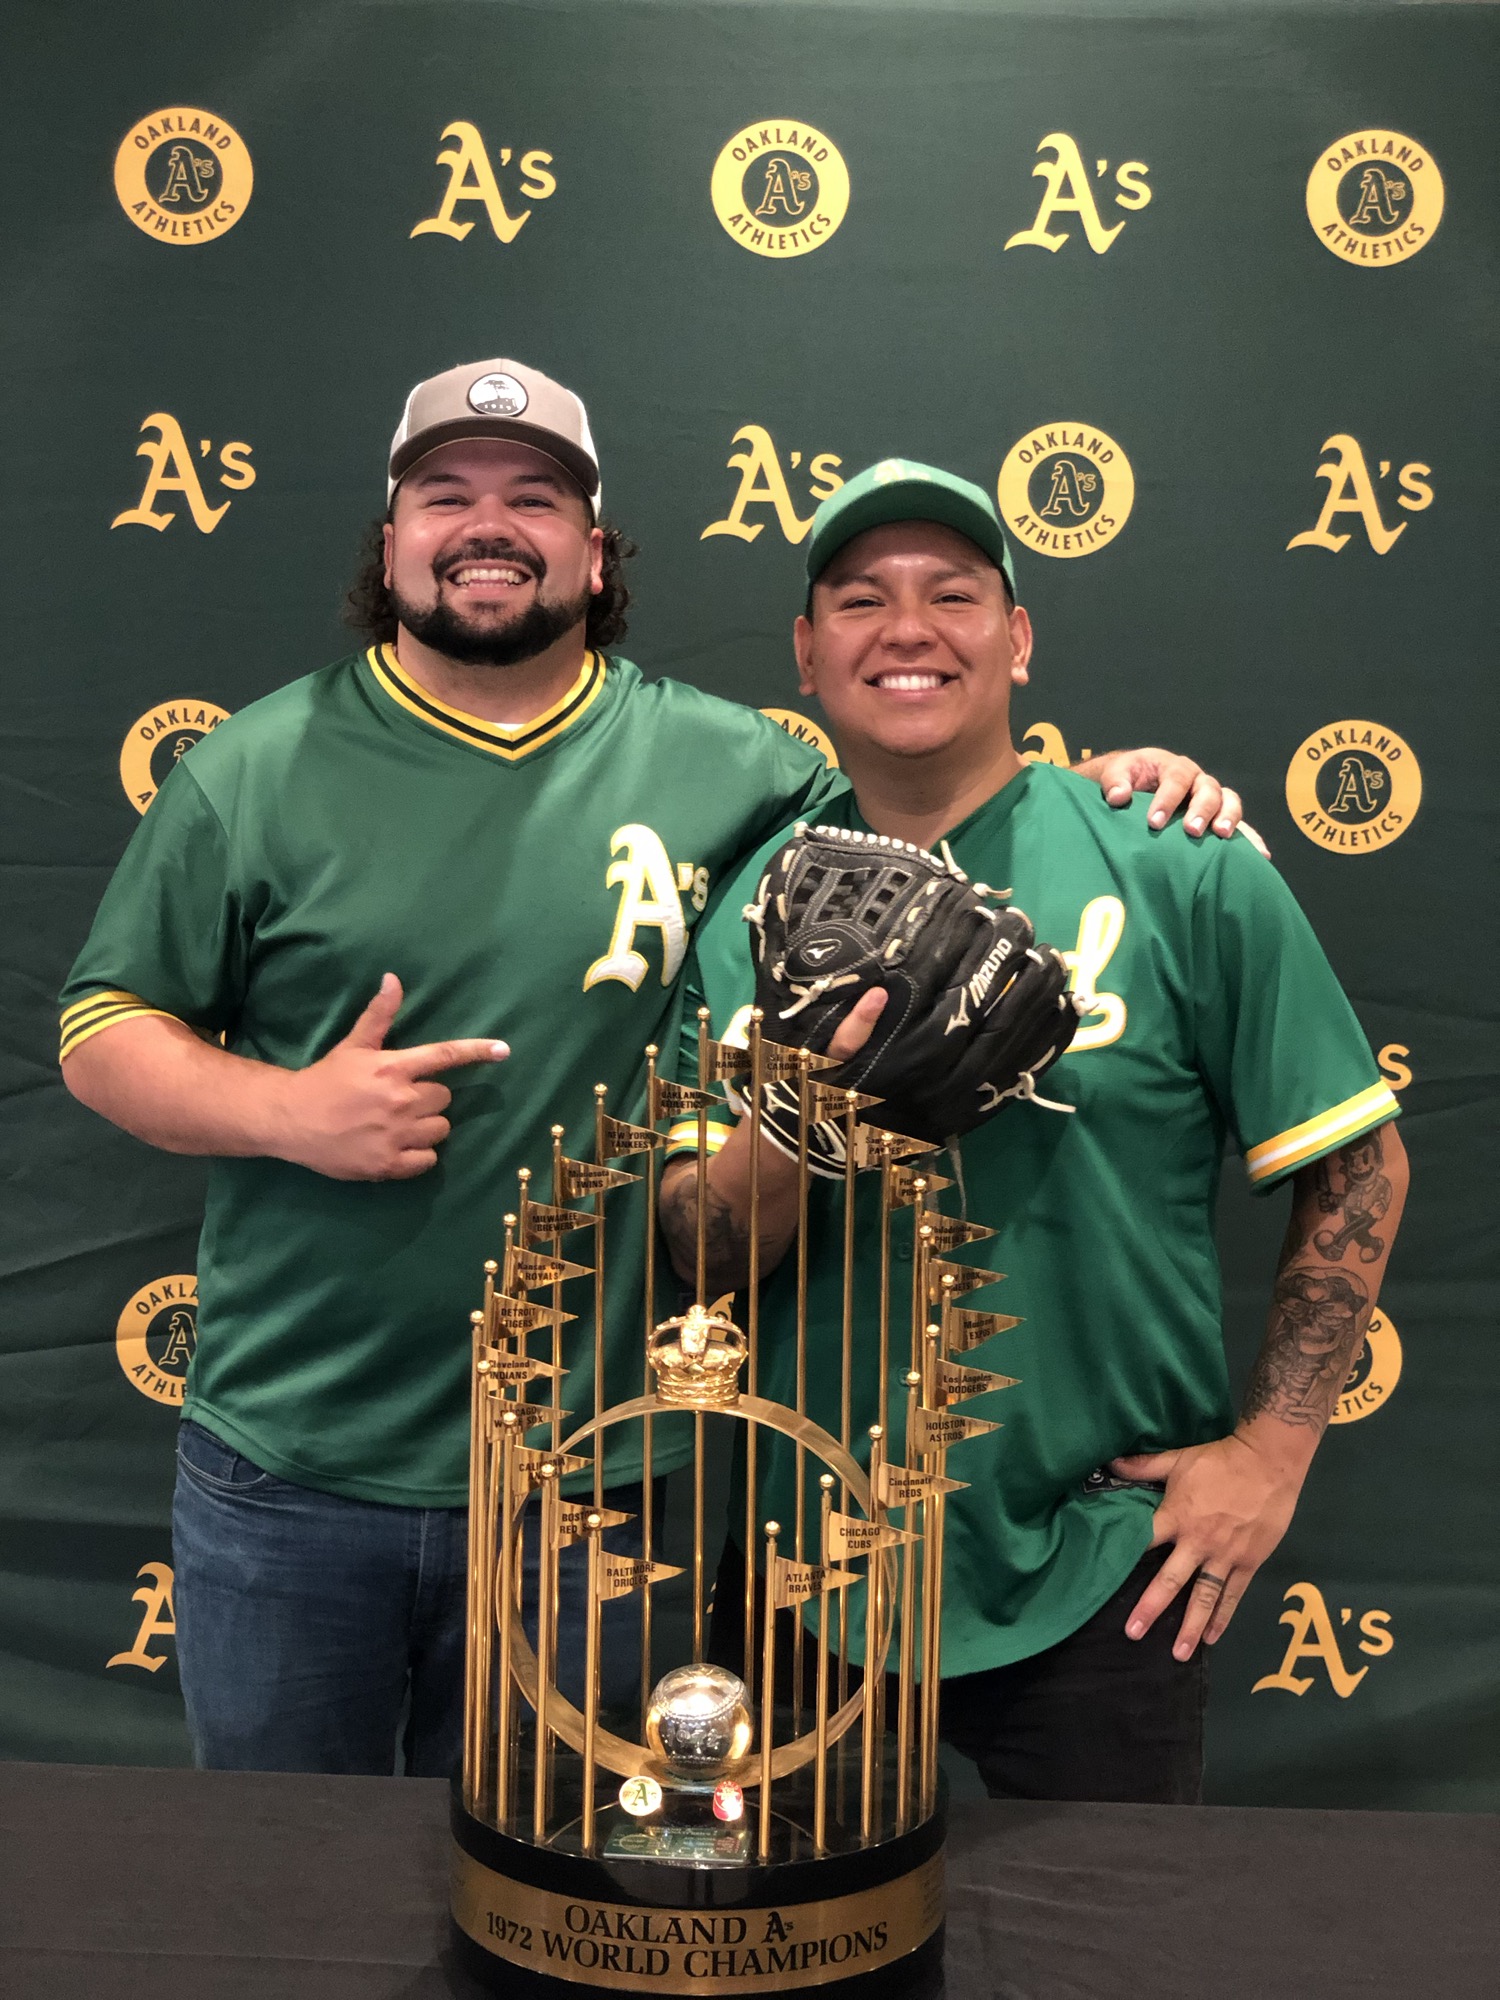 Two men wearing green and gold baseball jerseys along with green baseball hats, smile from behind the golden Oakland A's 1972 World Champions trophy.